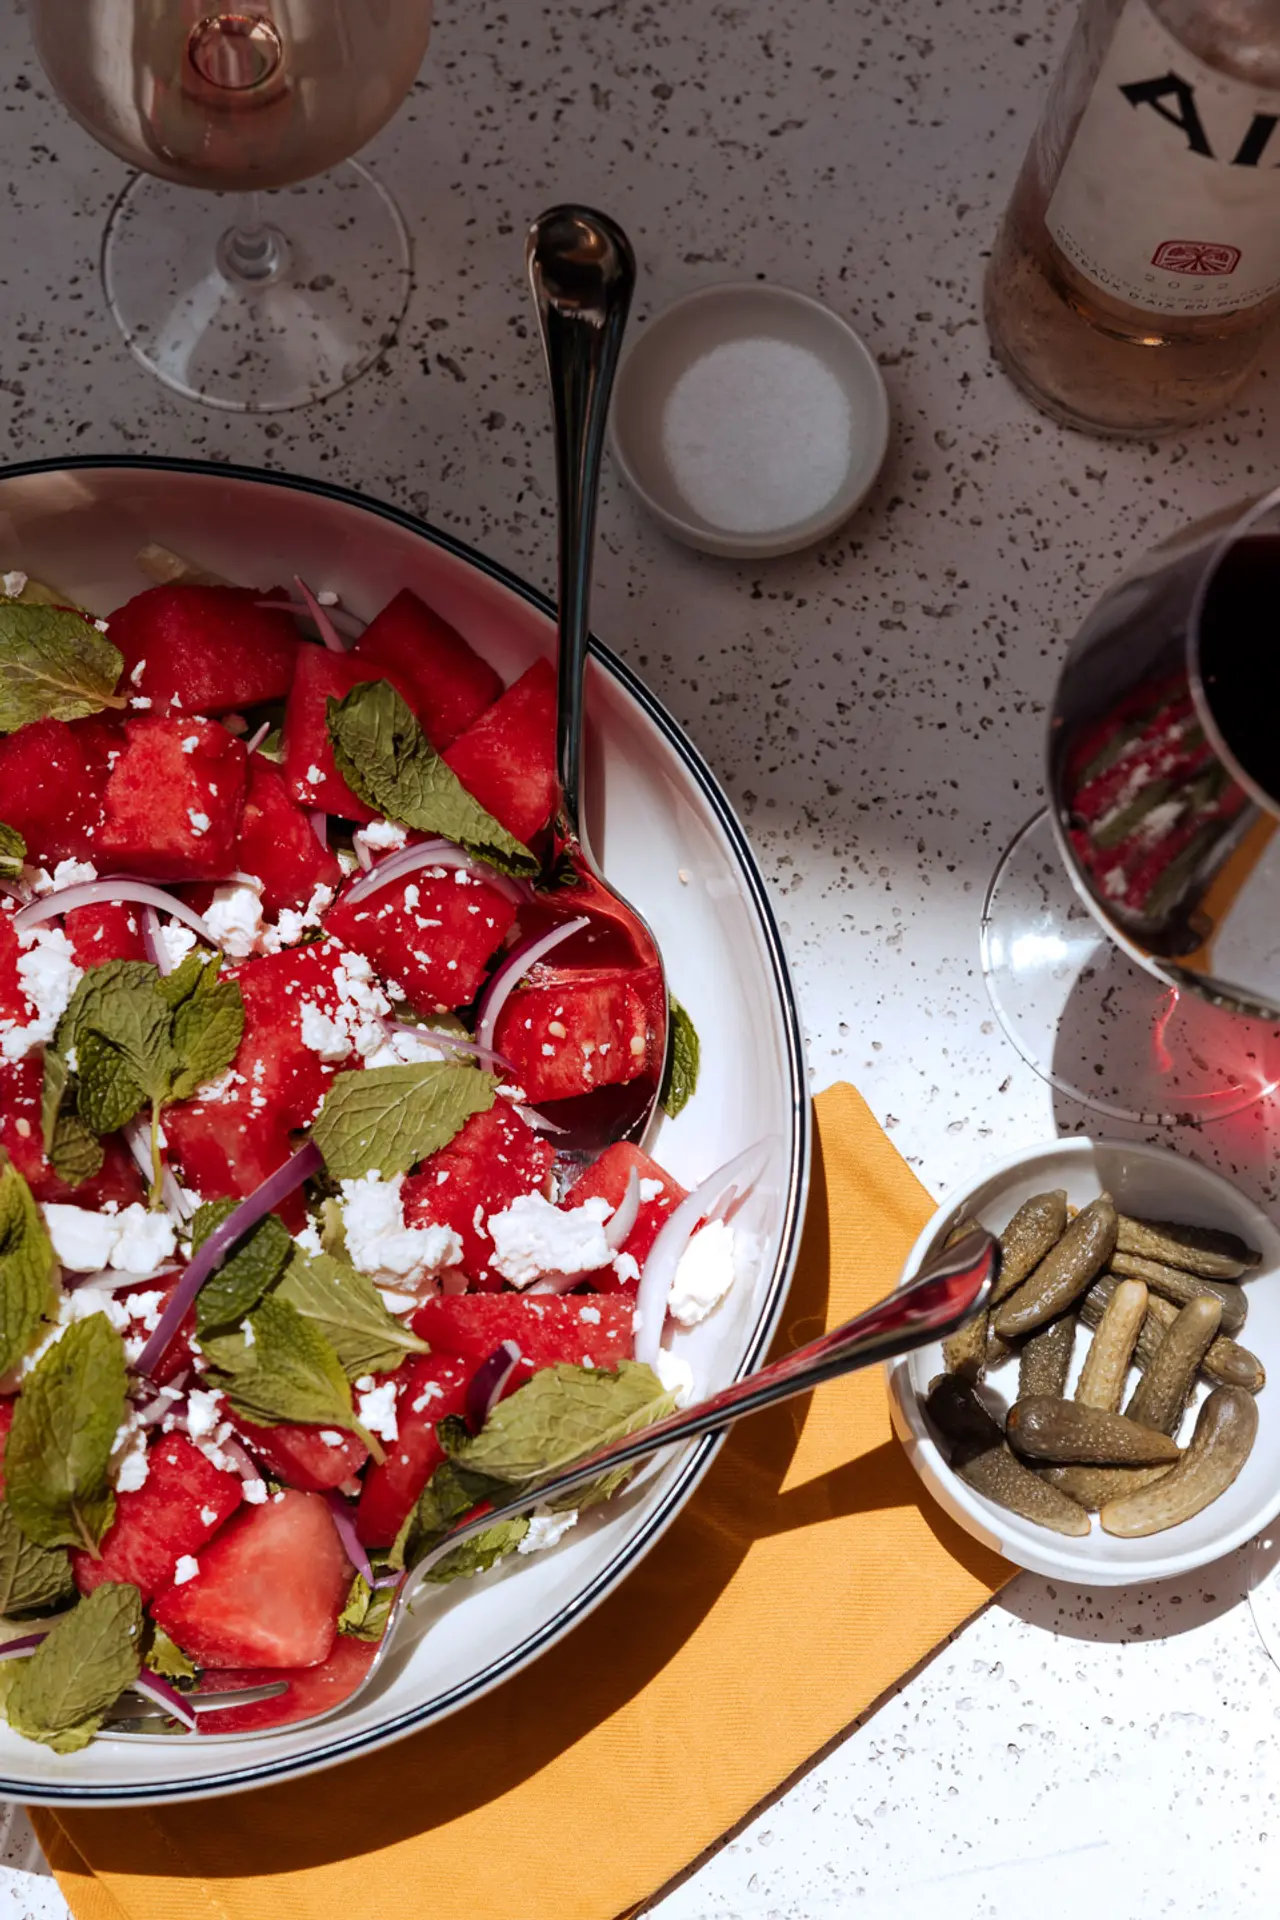 A bowl of watermelon salad sprinkled with feta cheese and mint leaves is accompanied by a small dish of pickles and a saltshaker, all set on a table with a glass of wine.